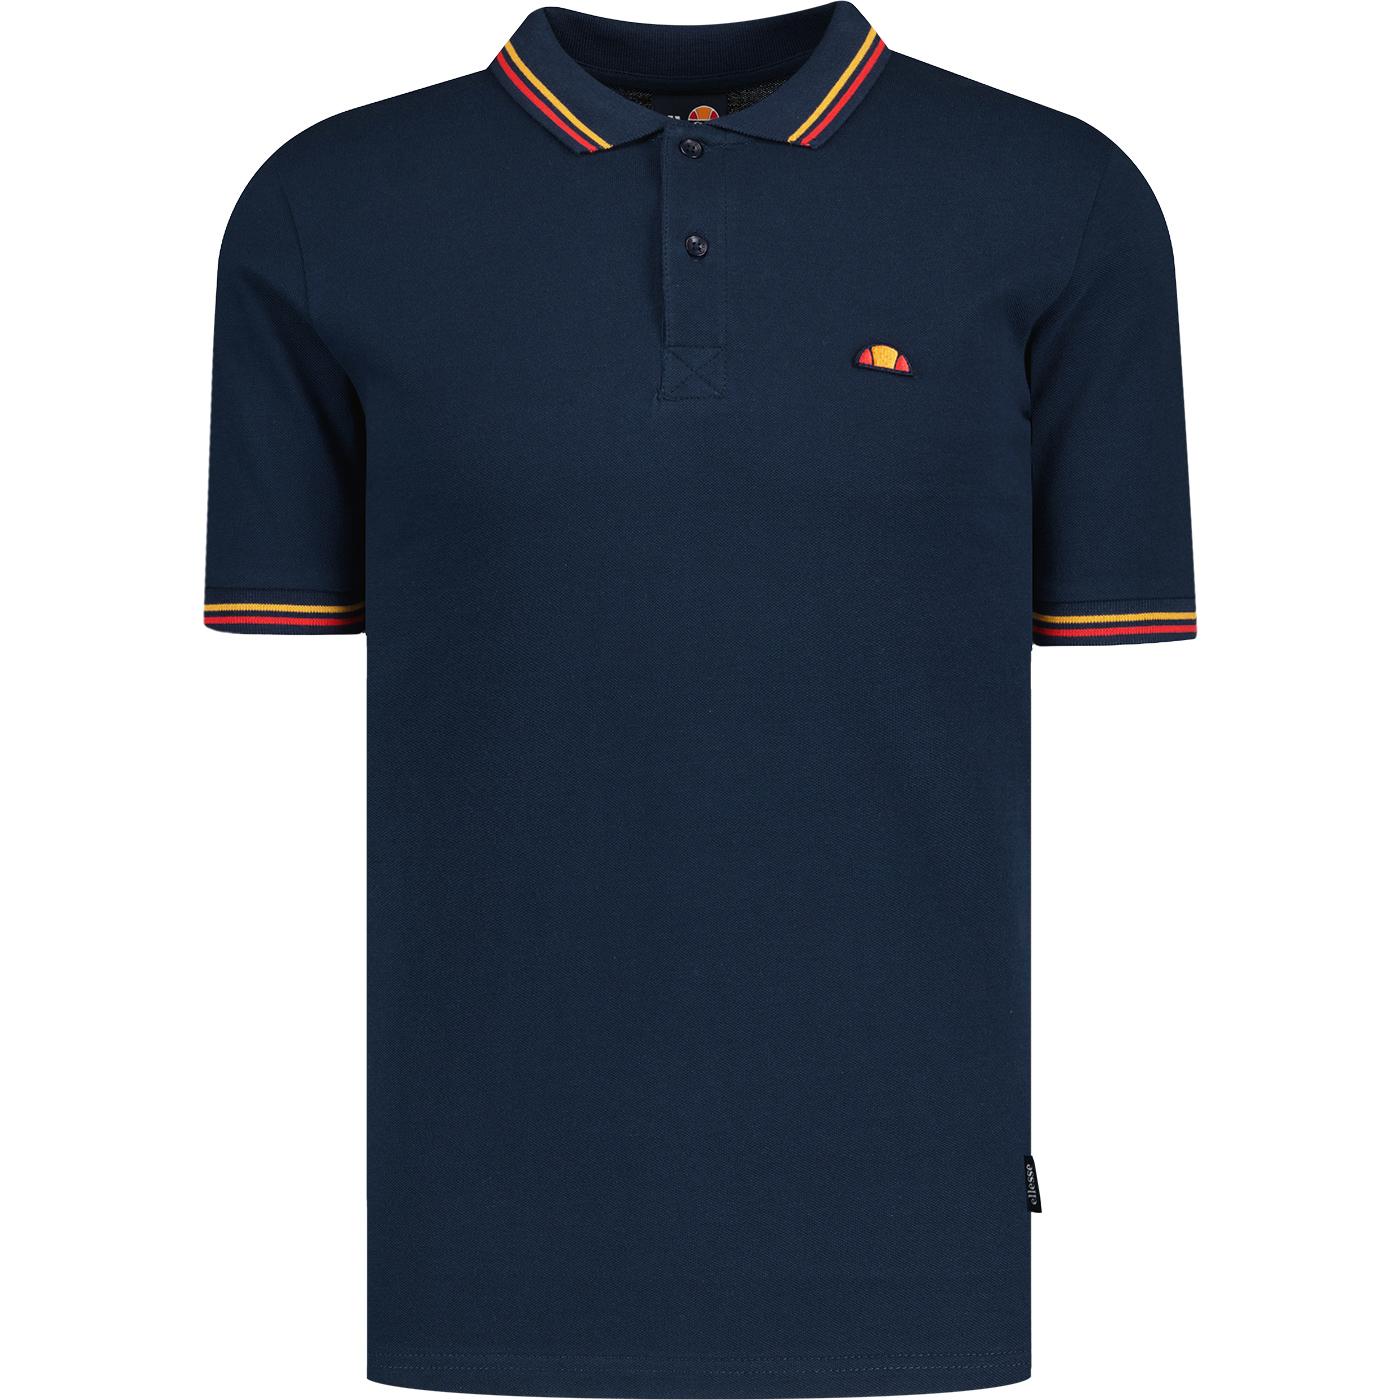 Rooks Ellesse Twin Tipped Pique Polo Shirt (Navy)